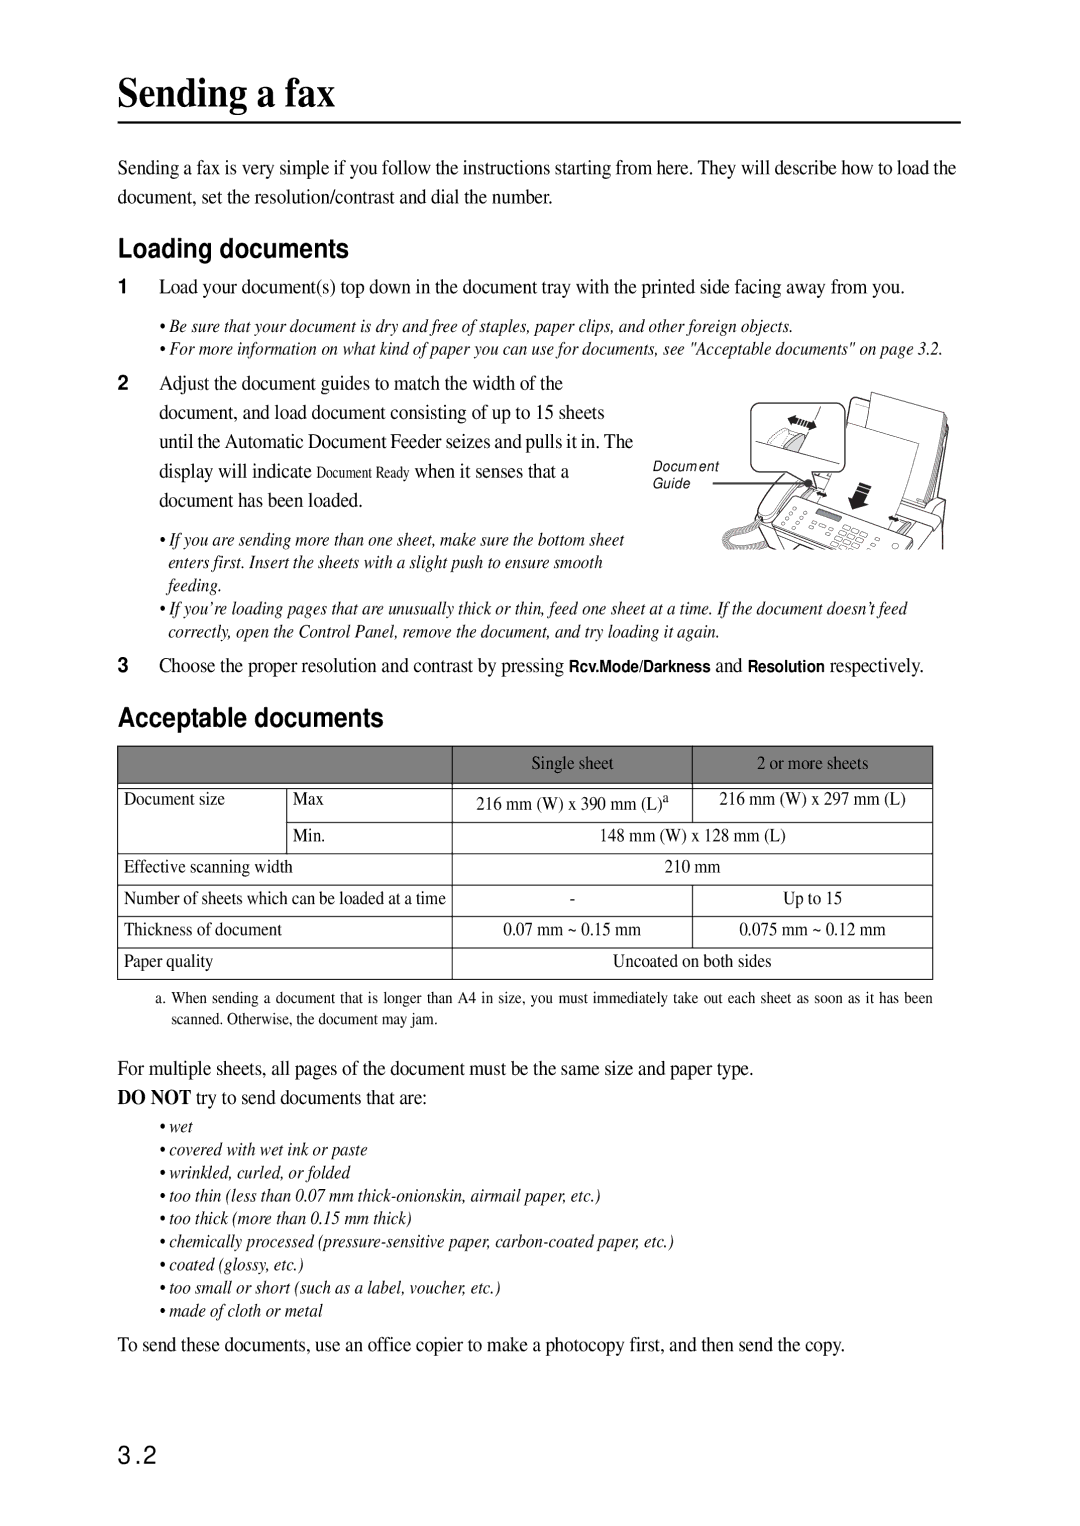 Samsung SF-370 Series manual Sending a fax, Loading documents, Acceptable documents 